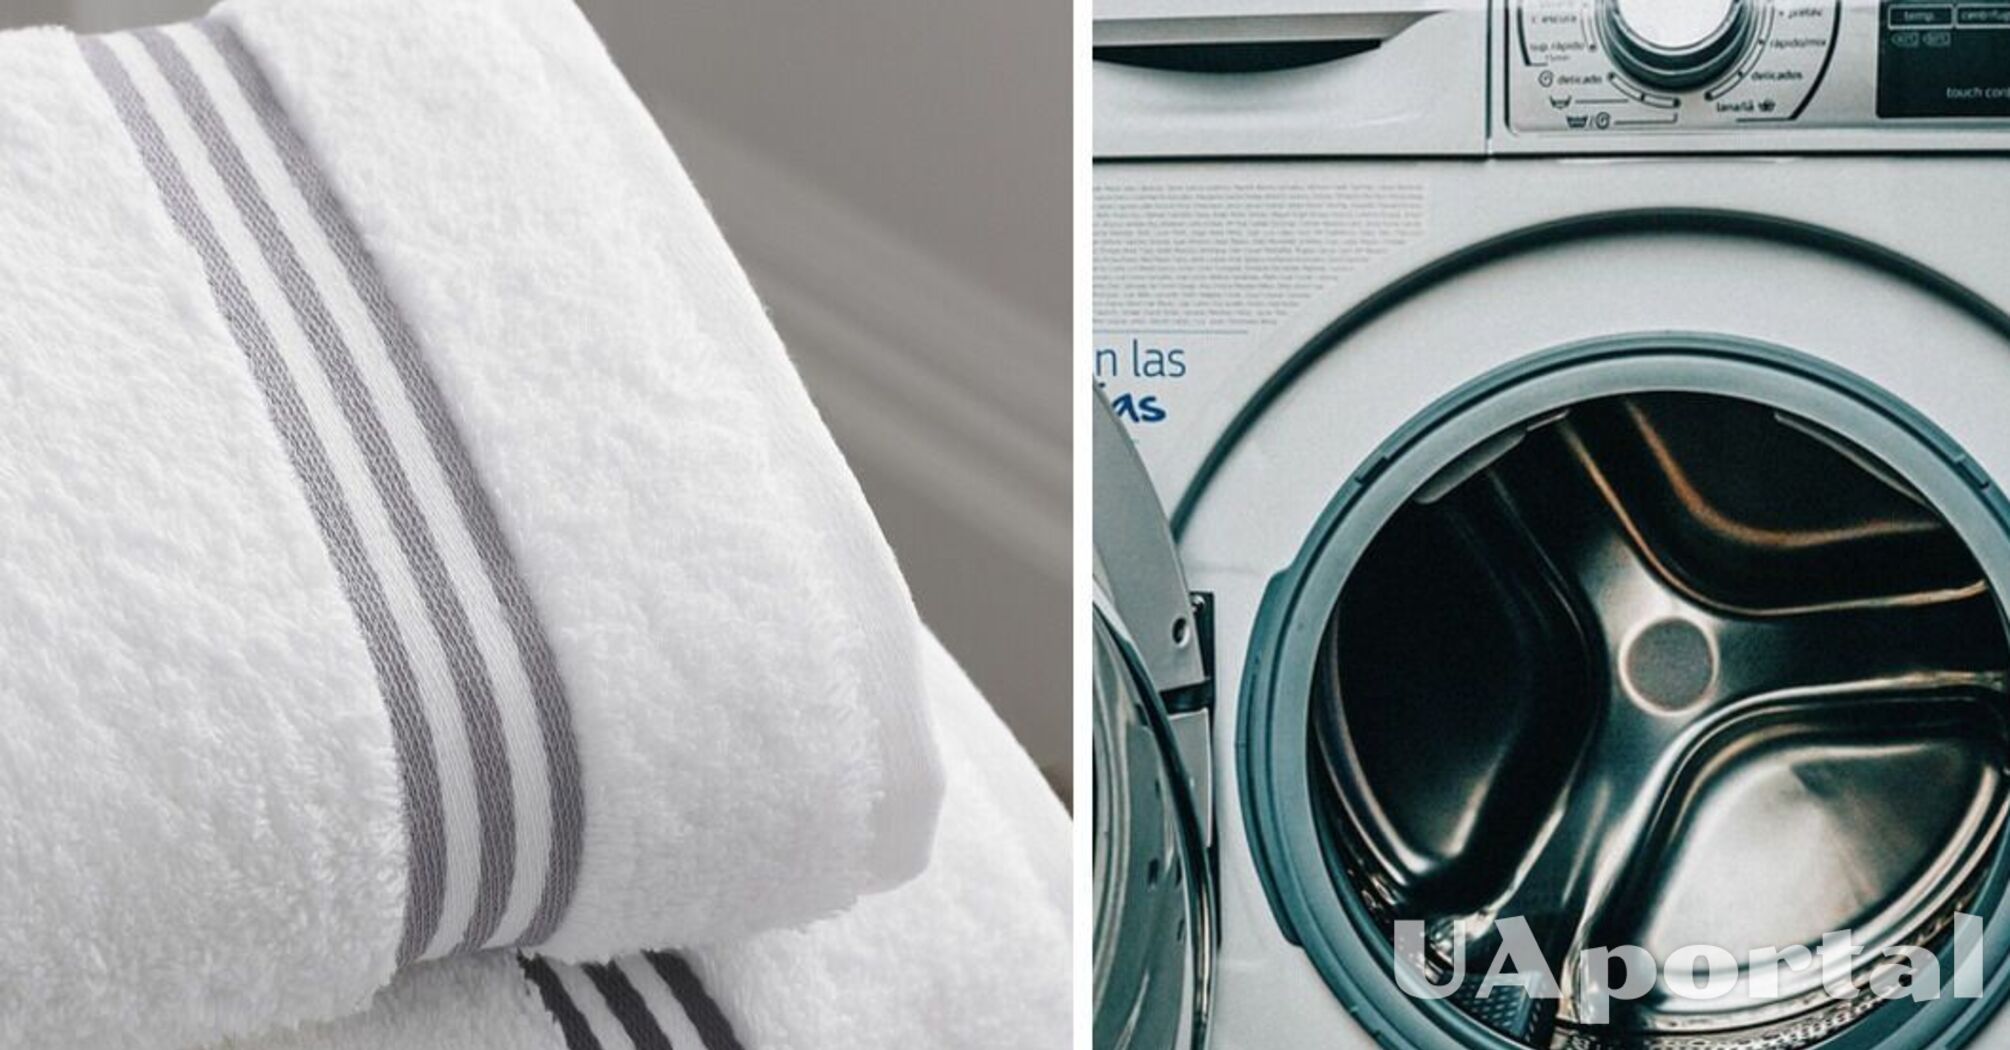 Experts have named a natural ingredient that will make towels smell great after washing